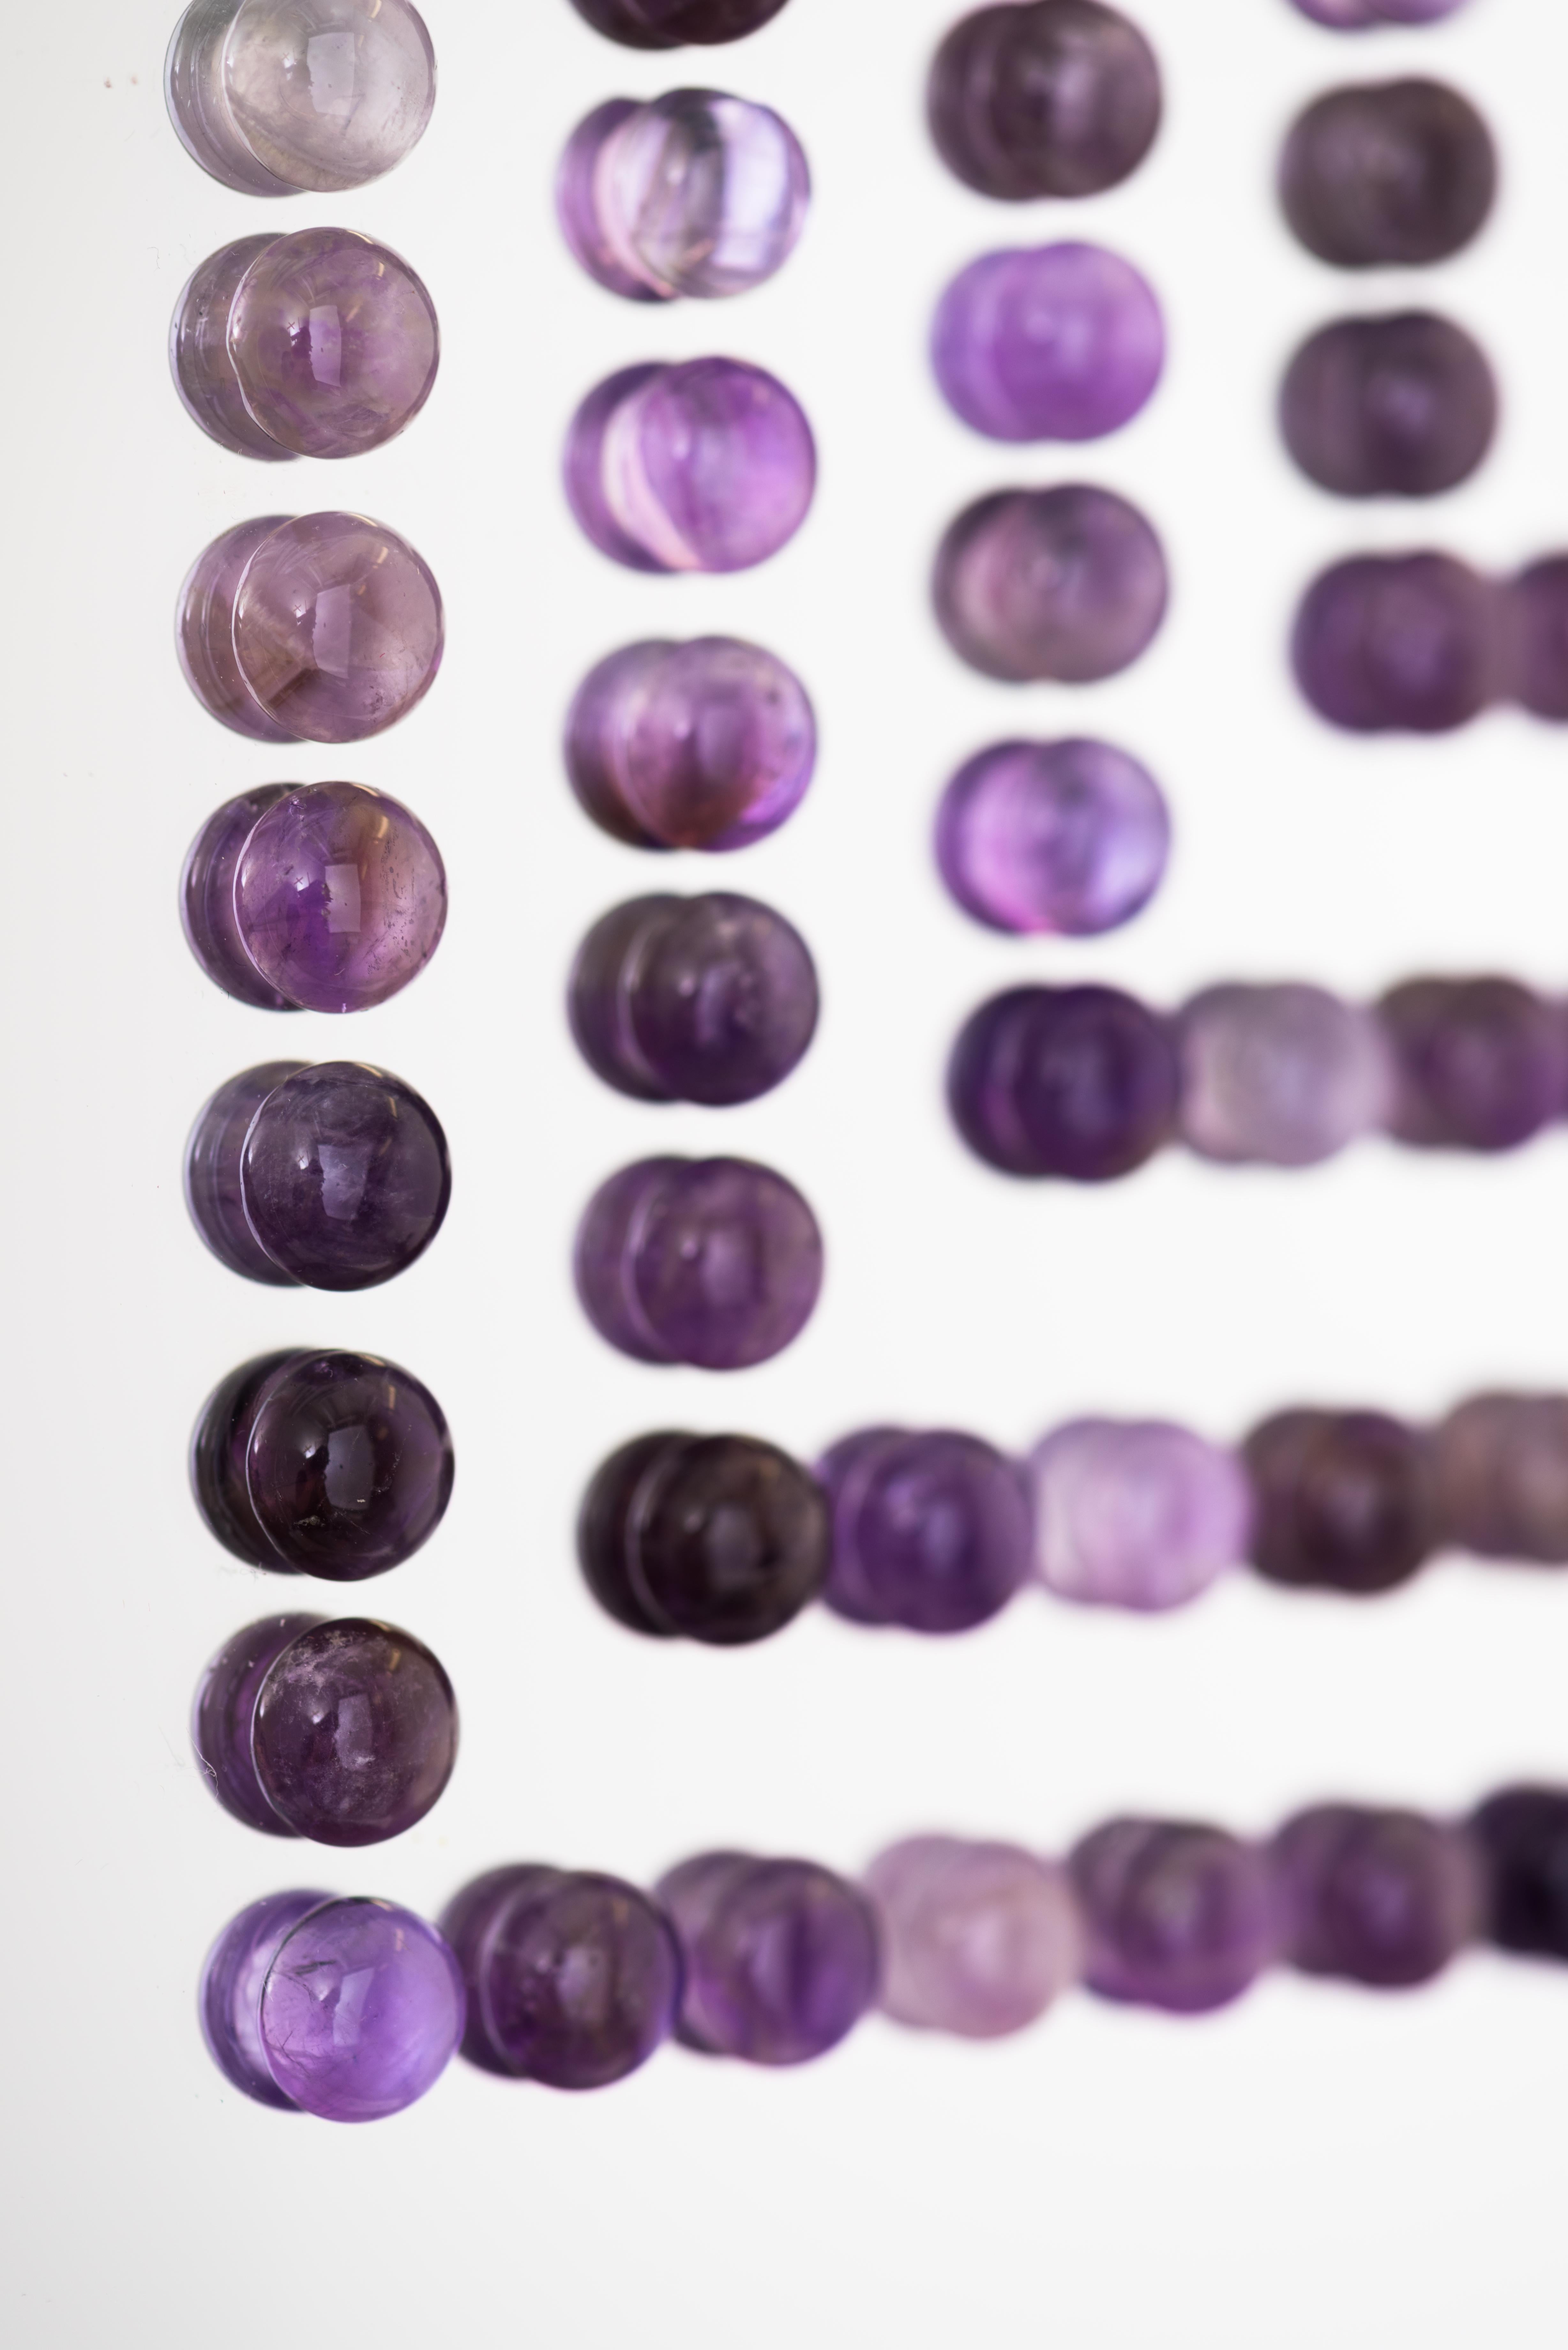 Composition of Wall Mirrors, Adorned with Amethysts, Handmade by Aline Erbeia For Sale 2